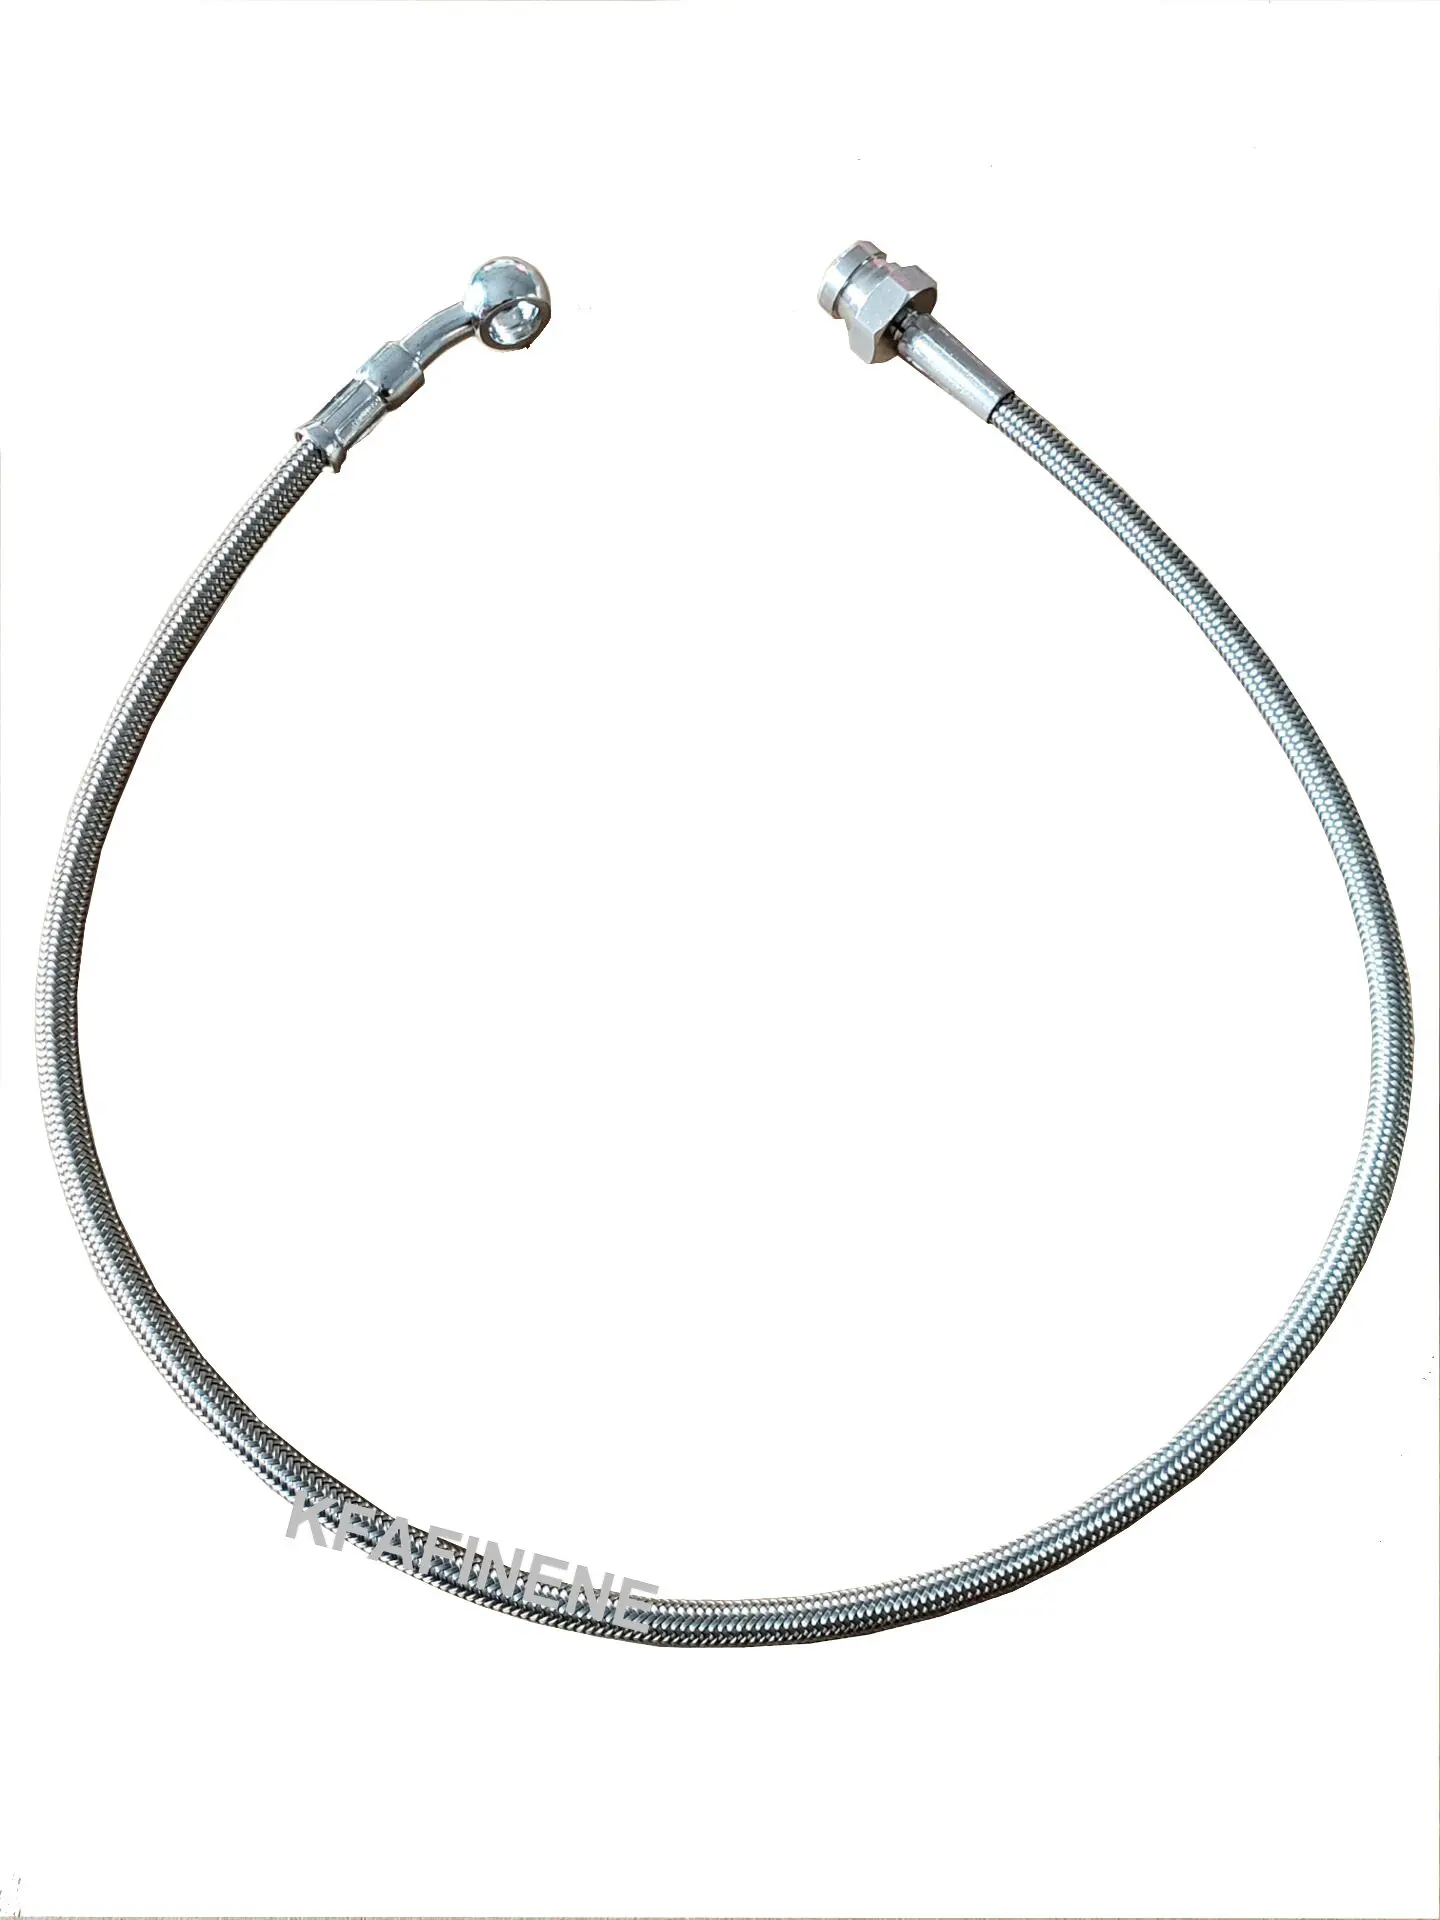 

Stainless Steel Braided PTFE brake line With 28 Degree Banjo Fittings And Hexagonal Joint